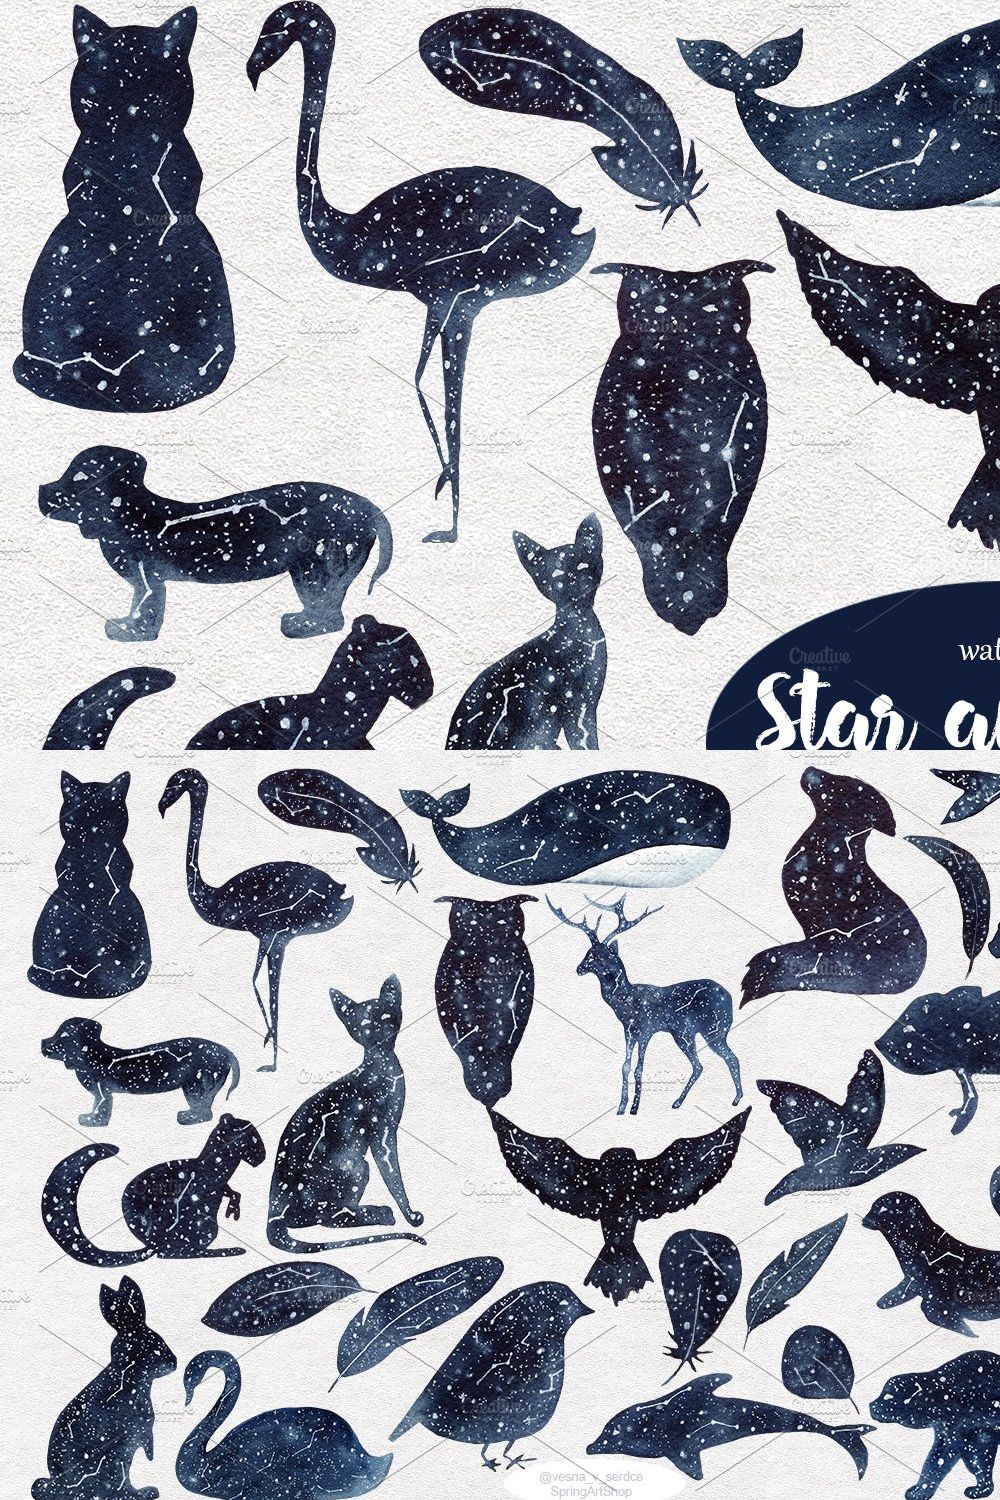 Star animals clipart & patterns pinterest preview image.